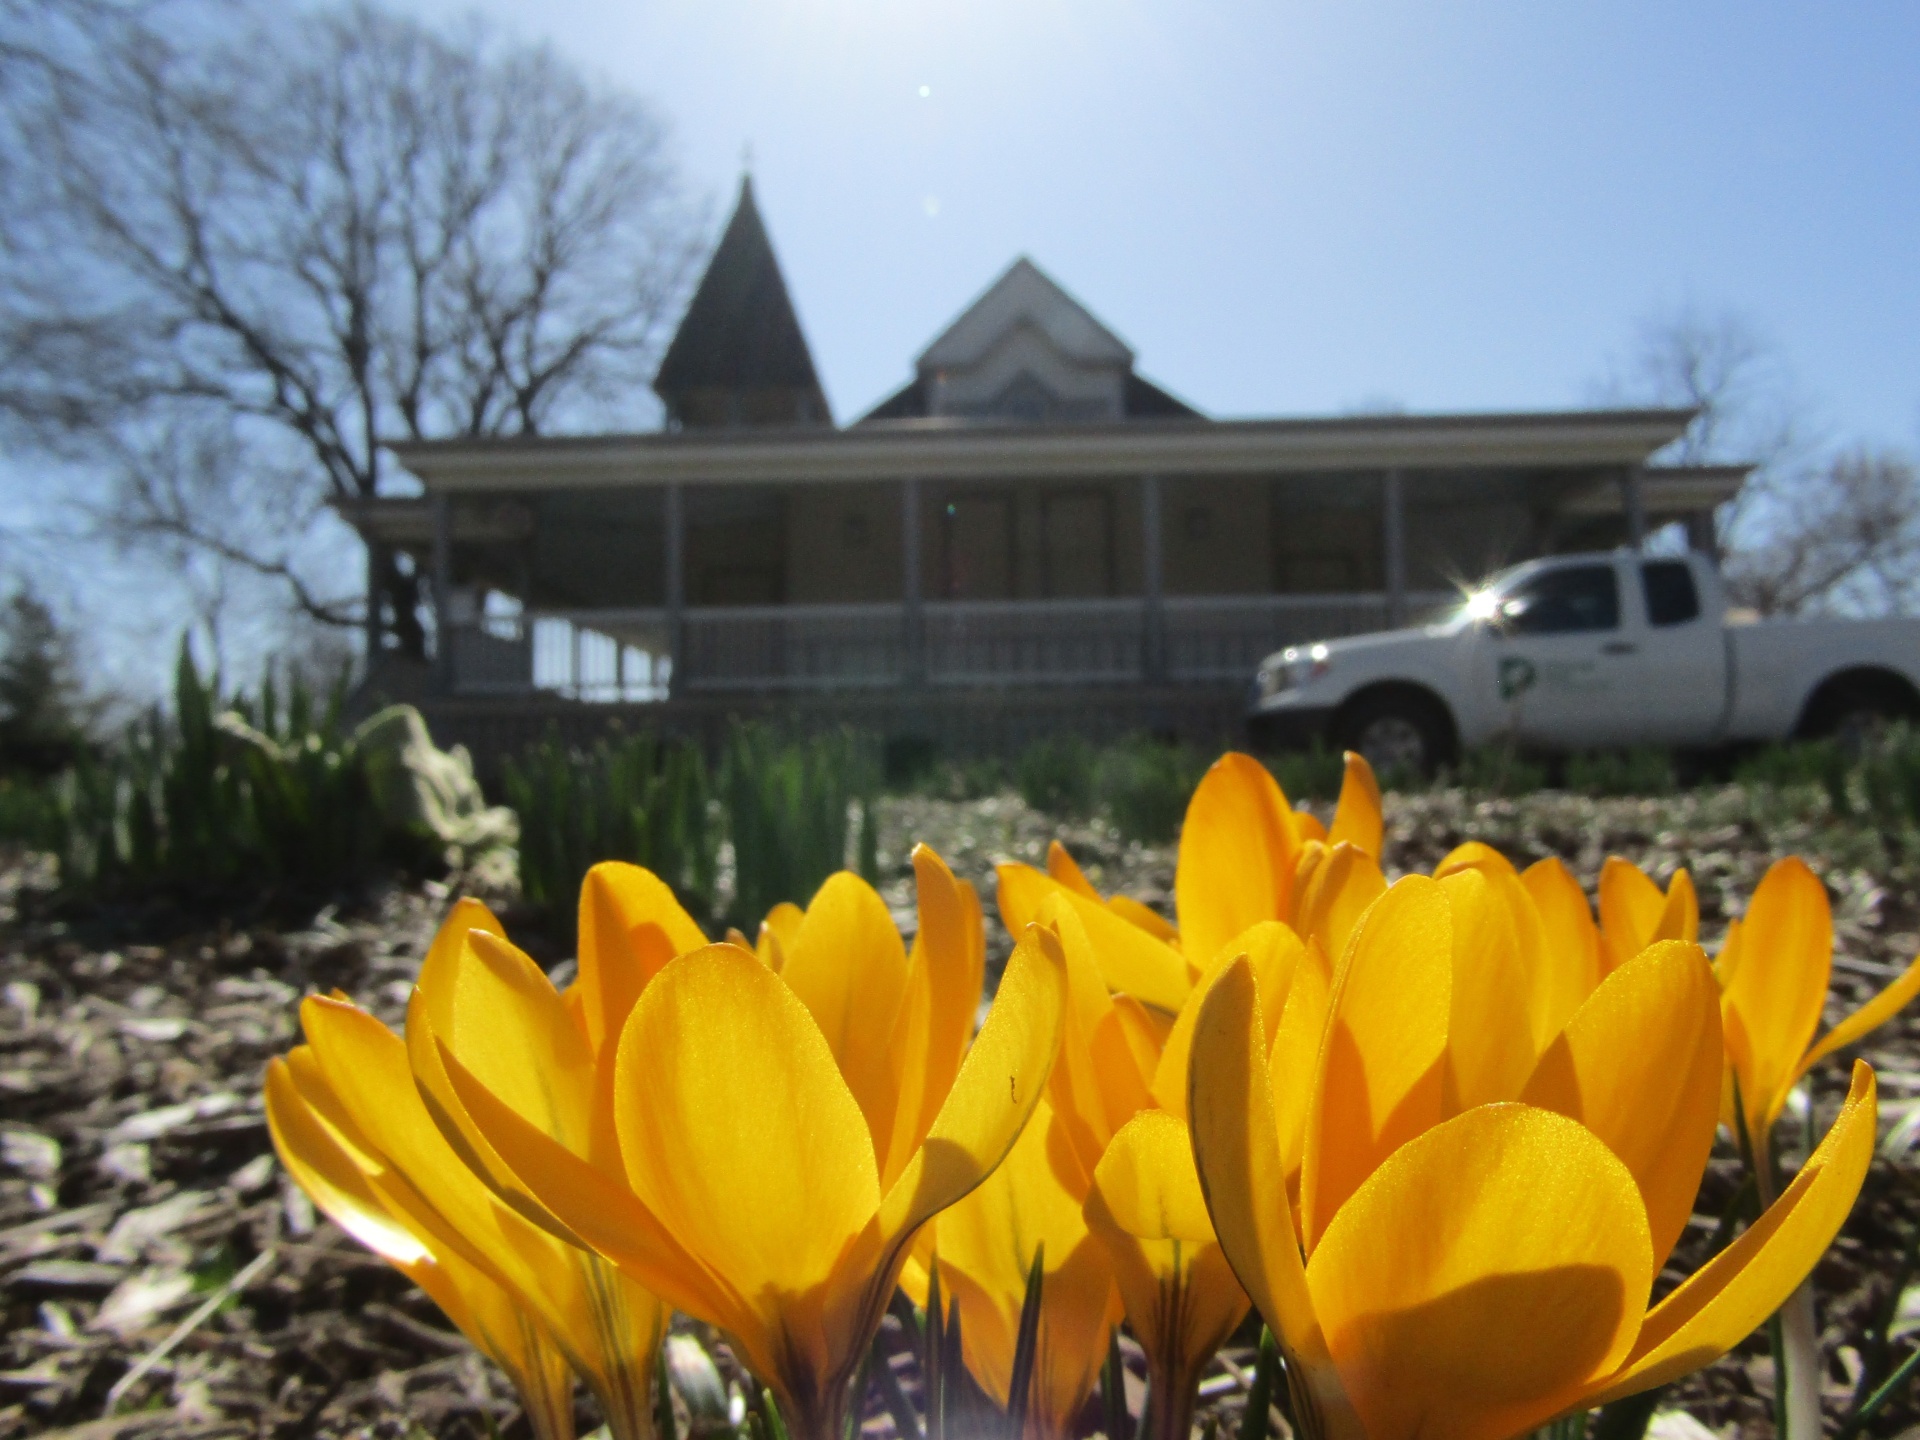 Yellow Crocus foreground with Chapel shelter and truck backg